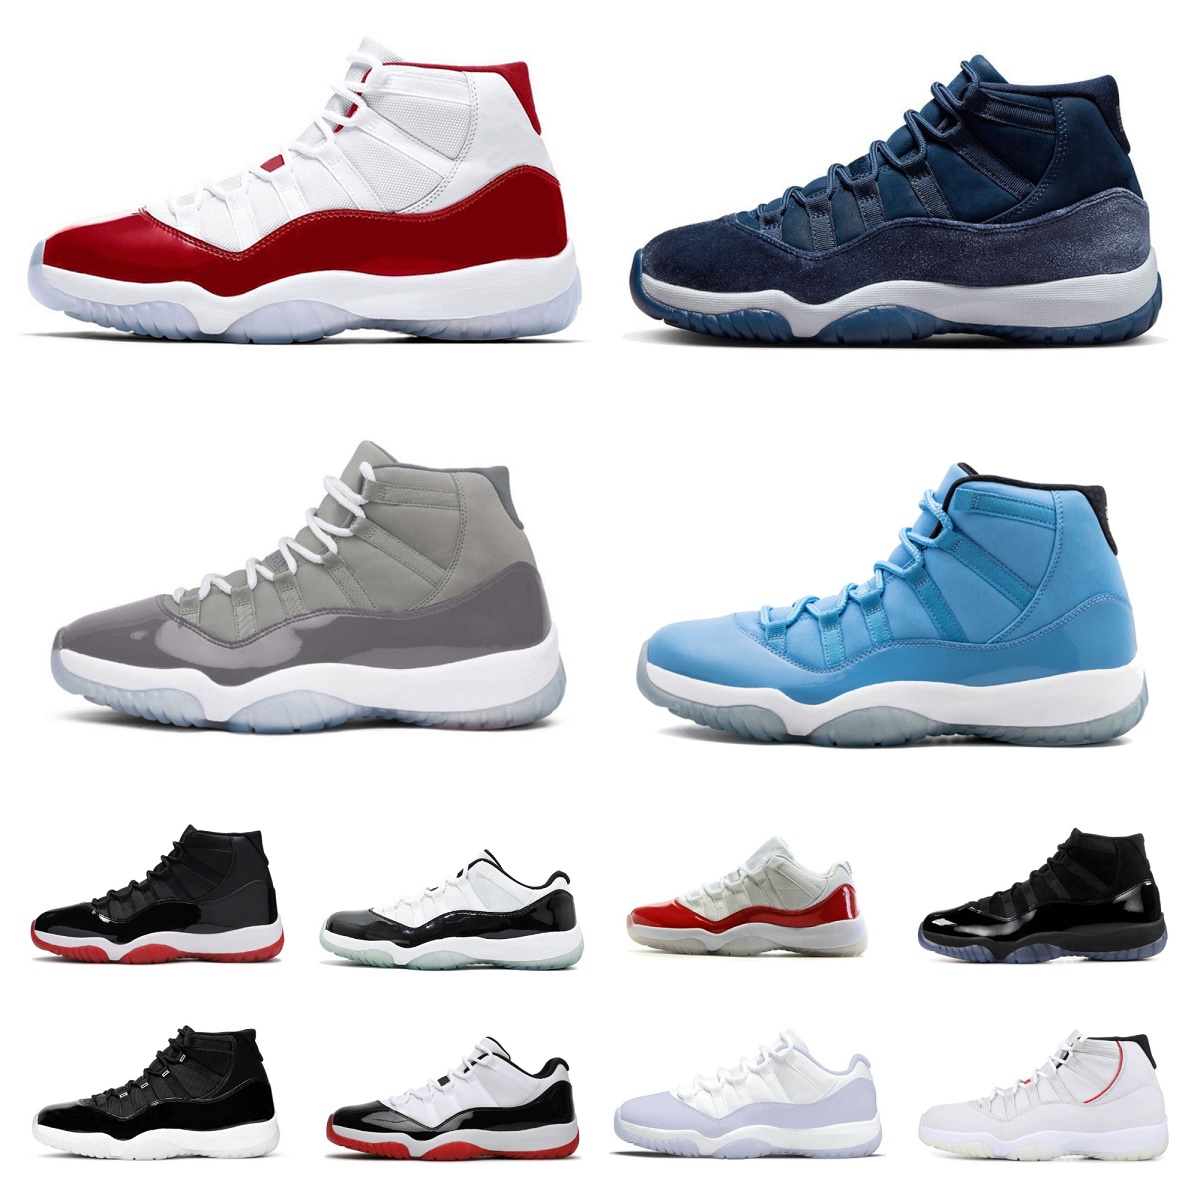 Retro High 11 Chaussures de basket-ball Jumpman 11s Jubilee 25e anniversaire Pure Violet Midnight Navy Cool Grey Cap et robe Concord 45 Playoffs Bred Low Designer Sneakers